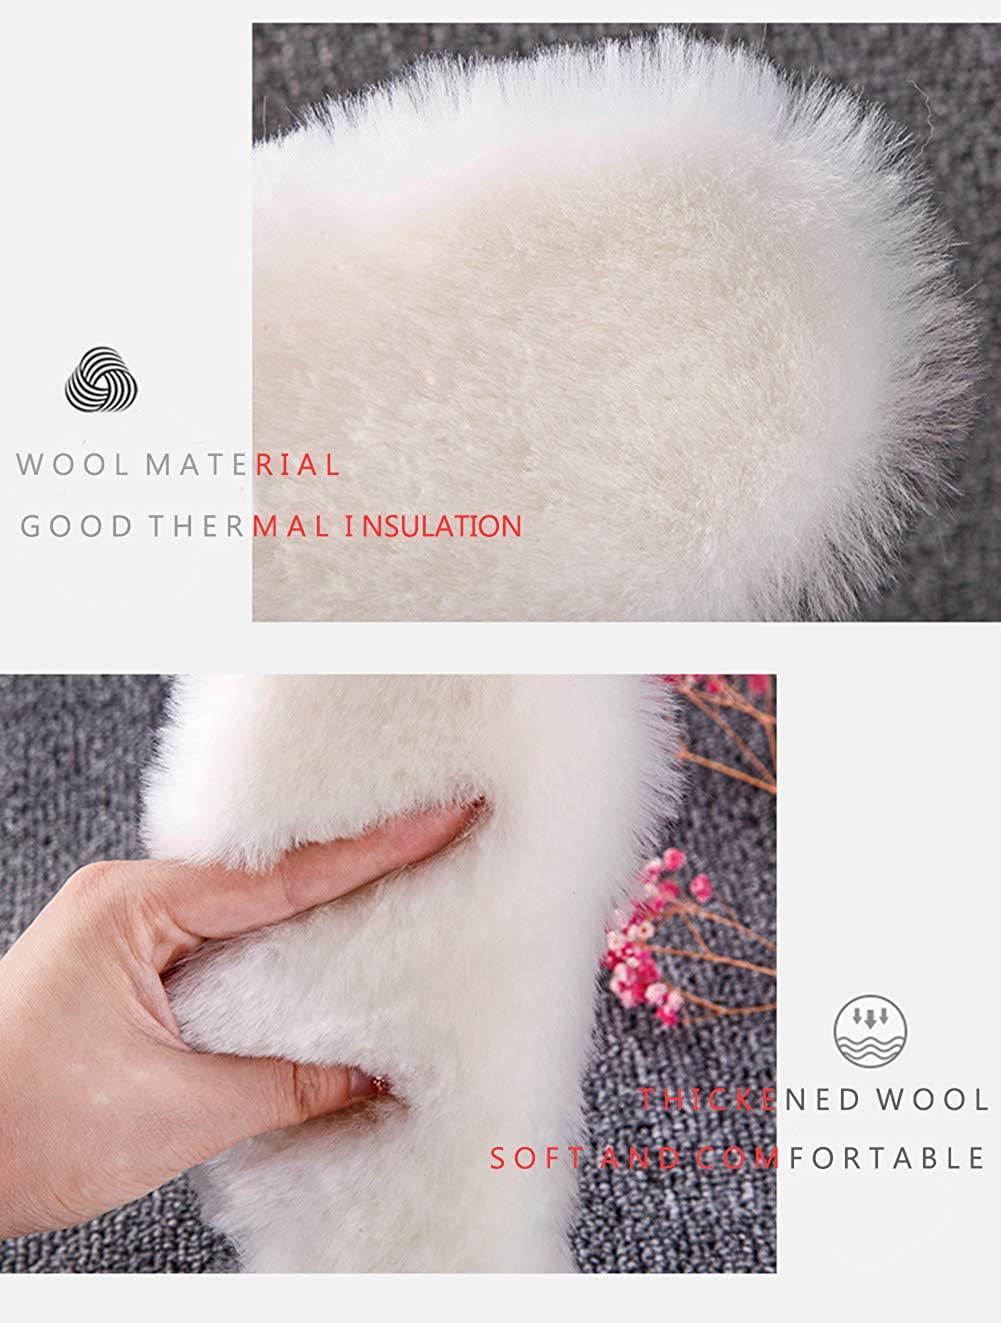 24cm,CA 7 Insoles Insert Pad Cushion Lambswool Cushioning Shearling Warm Felt Insole Foot Care Fluffy Thick Handmade Felt Sole Shoes Inserts Pads for Frostbite Feet in Cold Winter